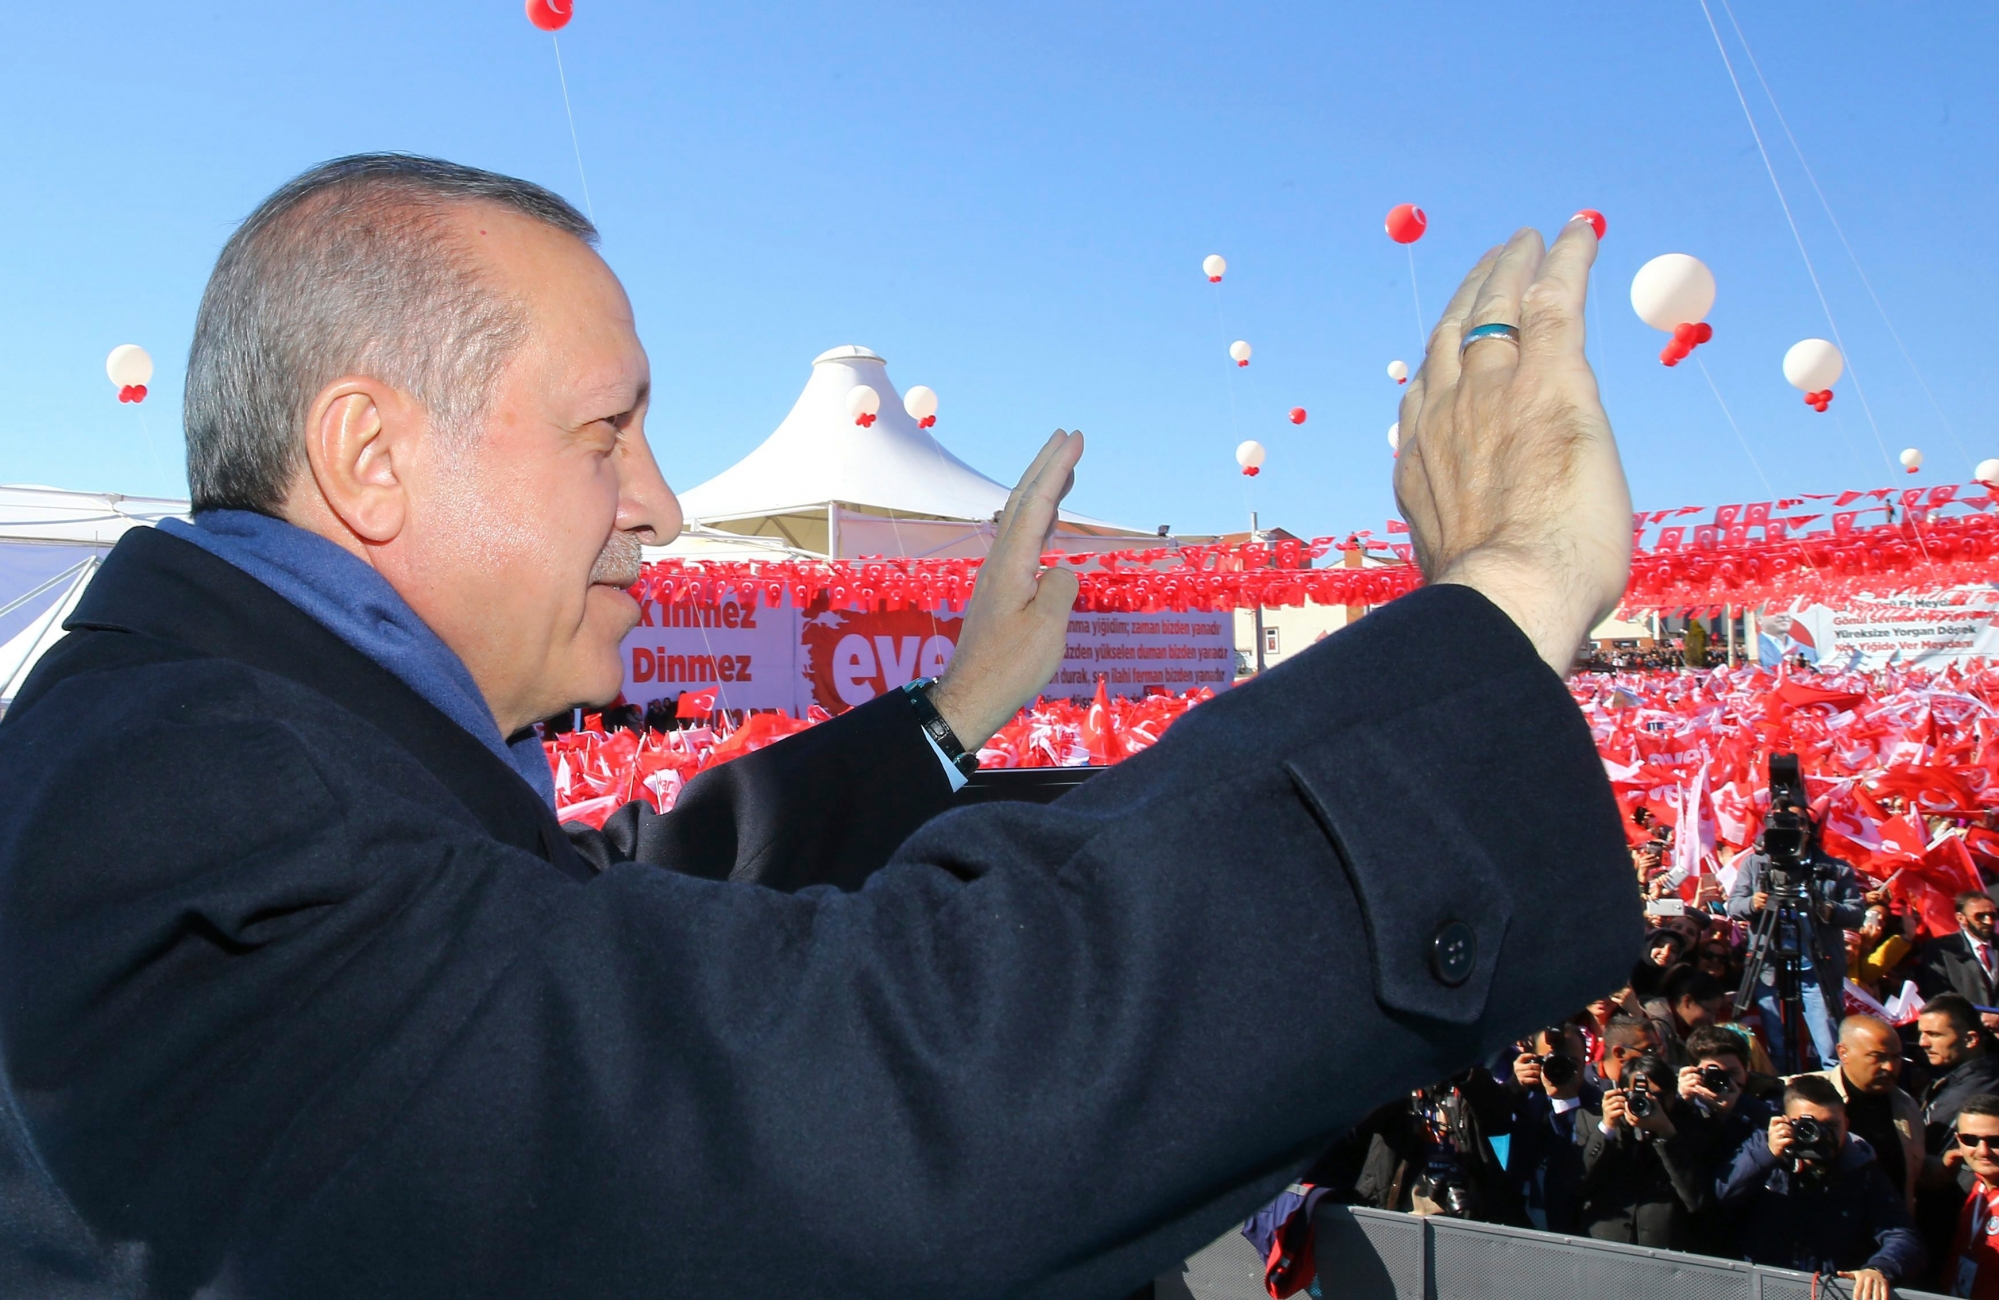 Turkey's President Recep Tayyip Erdogan addresses his supporters in Kastamonu, Turkey, Wednesday, March 22, 2017. Erdogan ramped up his anti-European rhetoric on Wednesday, warning that the safety of Western citizens could be in peril if European nations persist in what he described as arrogant conduct. Erdogan's remarks came amid tension over Dutch and German restrictions on Turkish officials who tried to campaign for diaspora votes ahead of an April 16 referendum on expanding the powers of the Turkish presidency. (Kayhan Ozer/Presidential Press Service, Pool Photo via AP) Turkey Europe